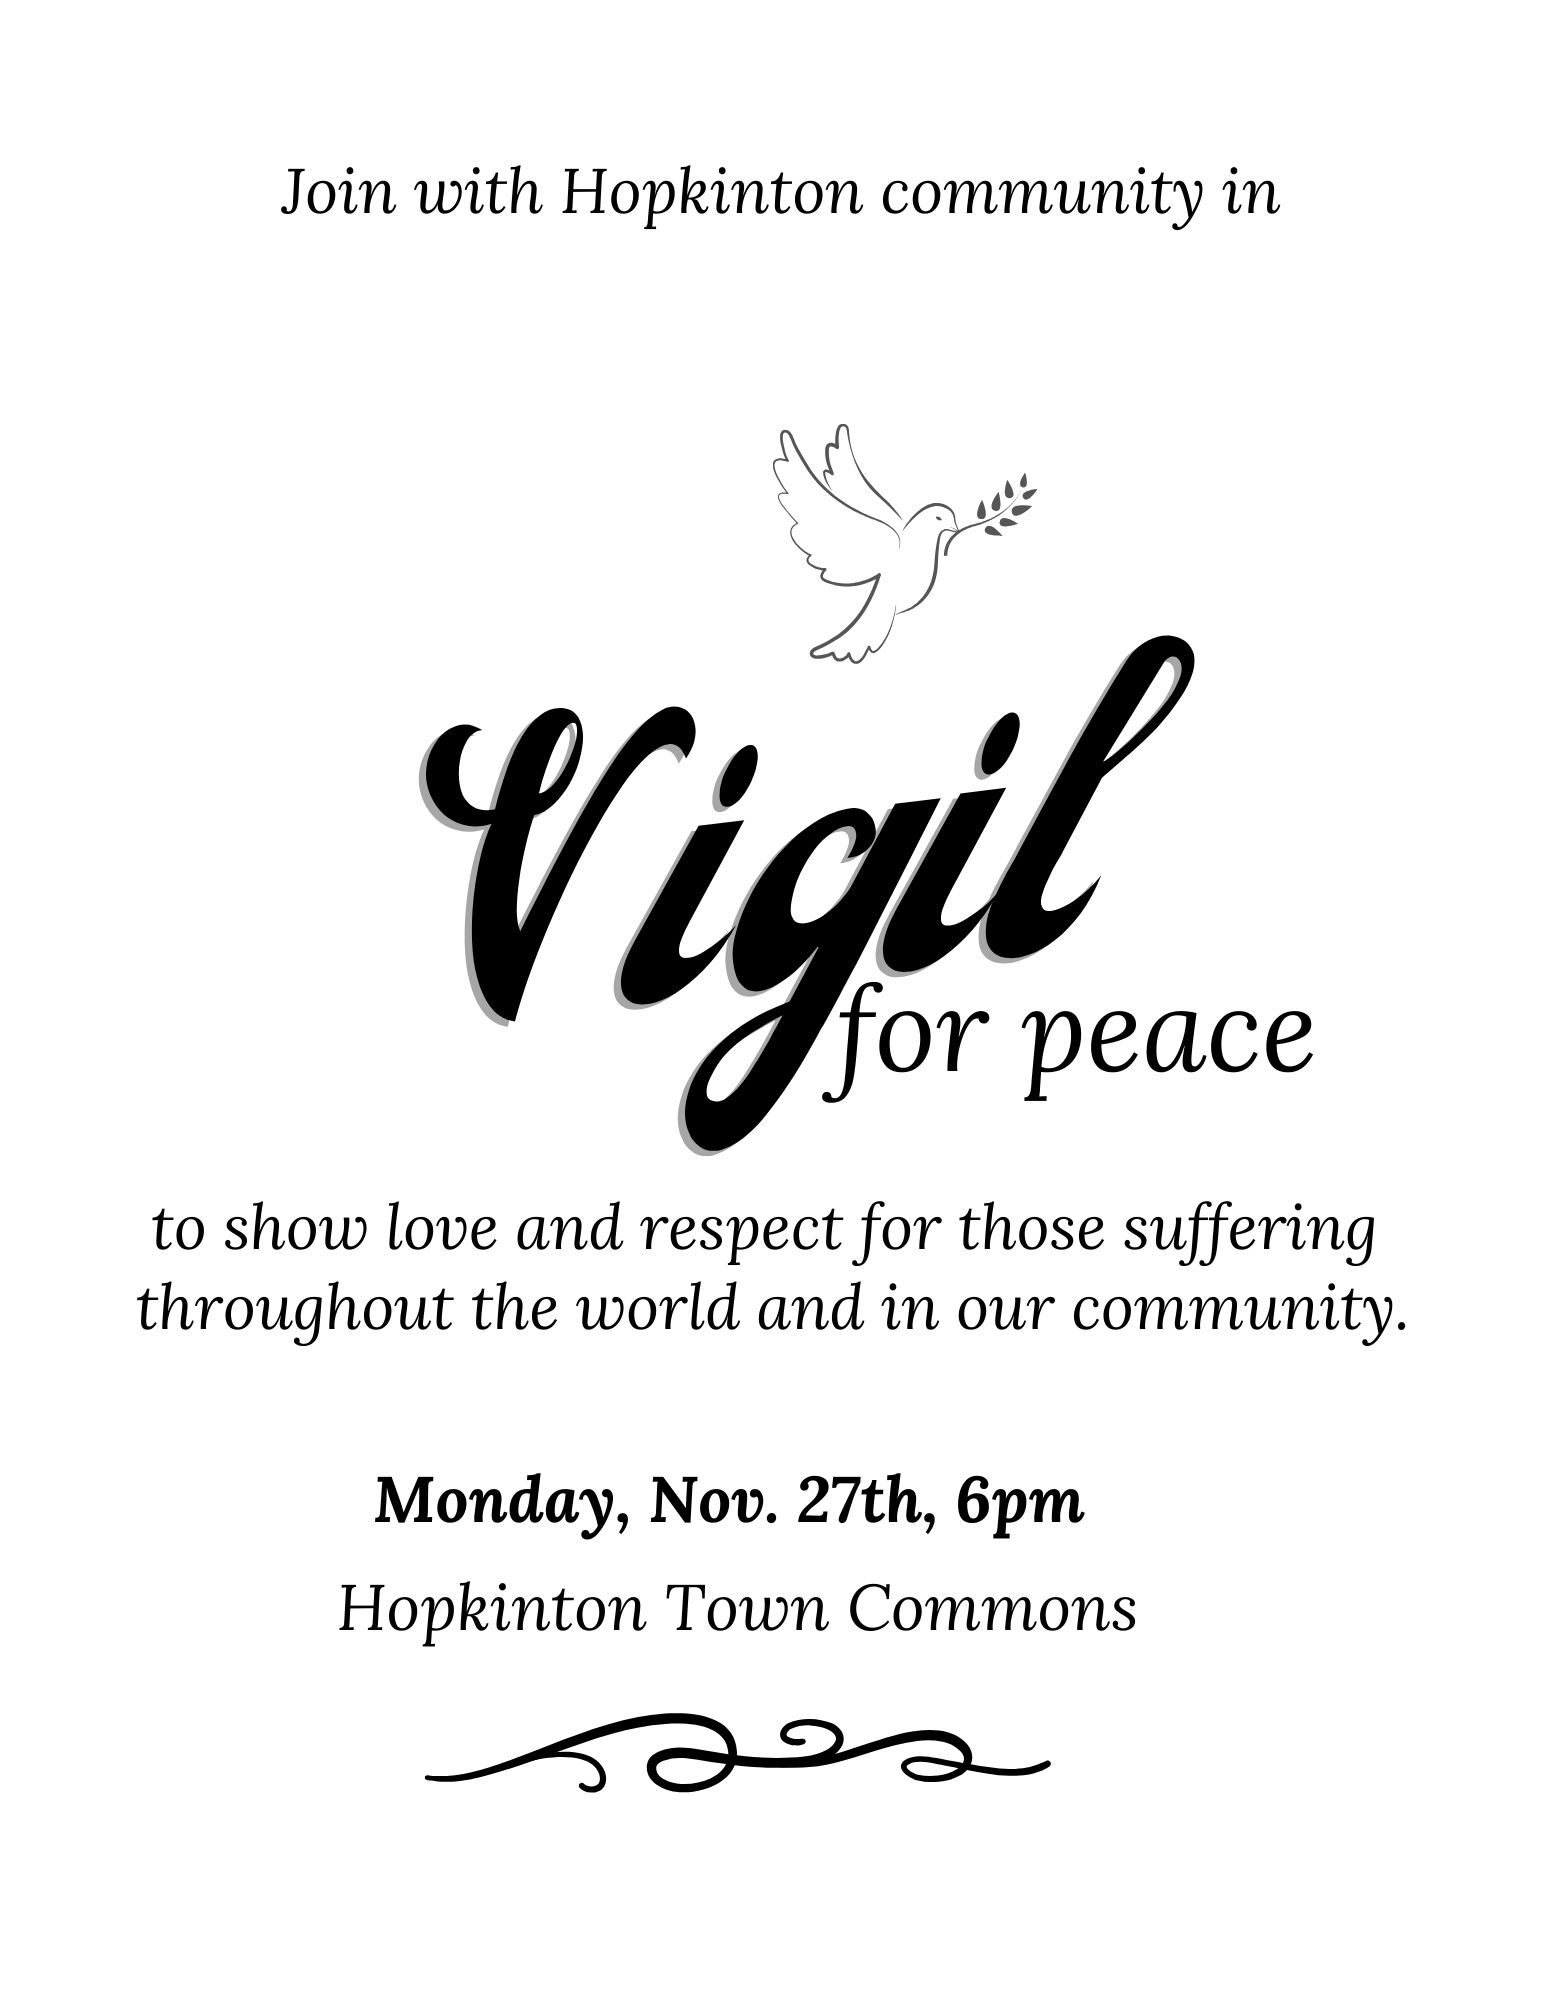 Vigil for Peace planned for Monday at Town Common